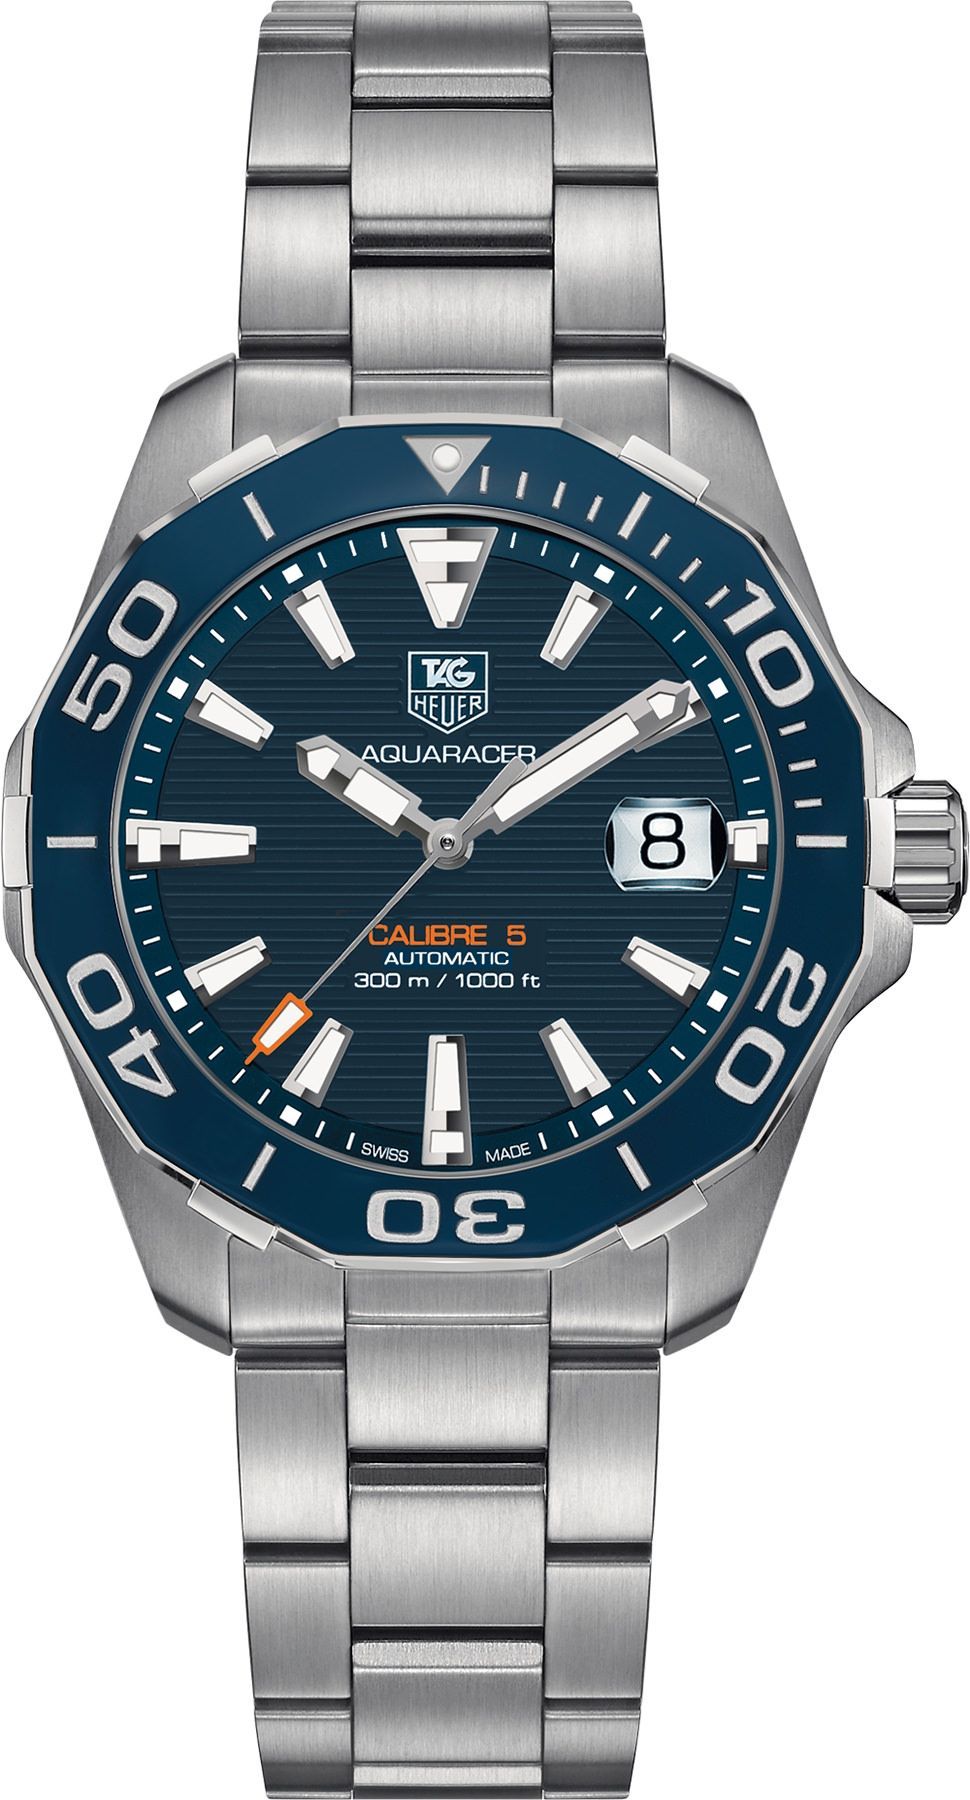 TAG Heuer Calibre 5 41 mm Watch in Blue Dial For Men - 1